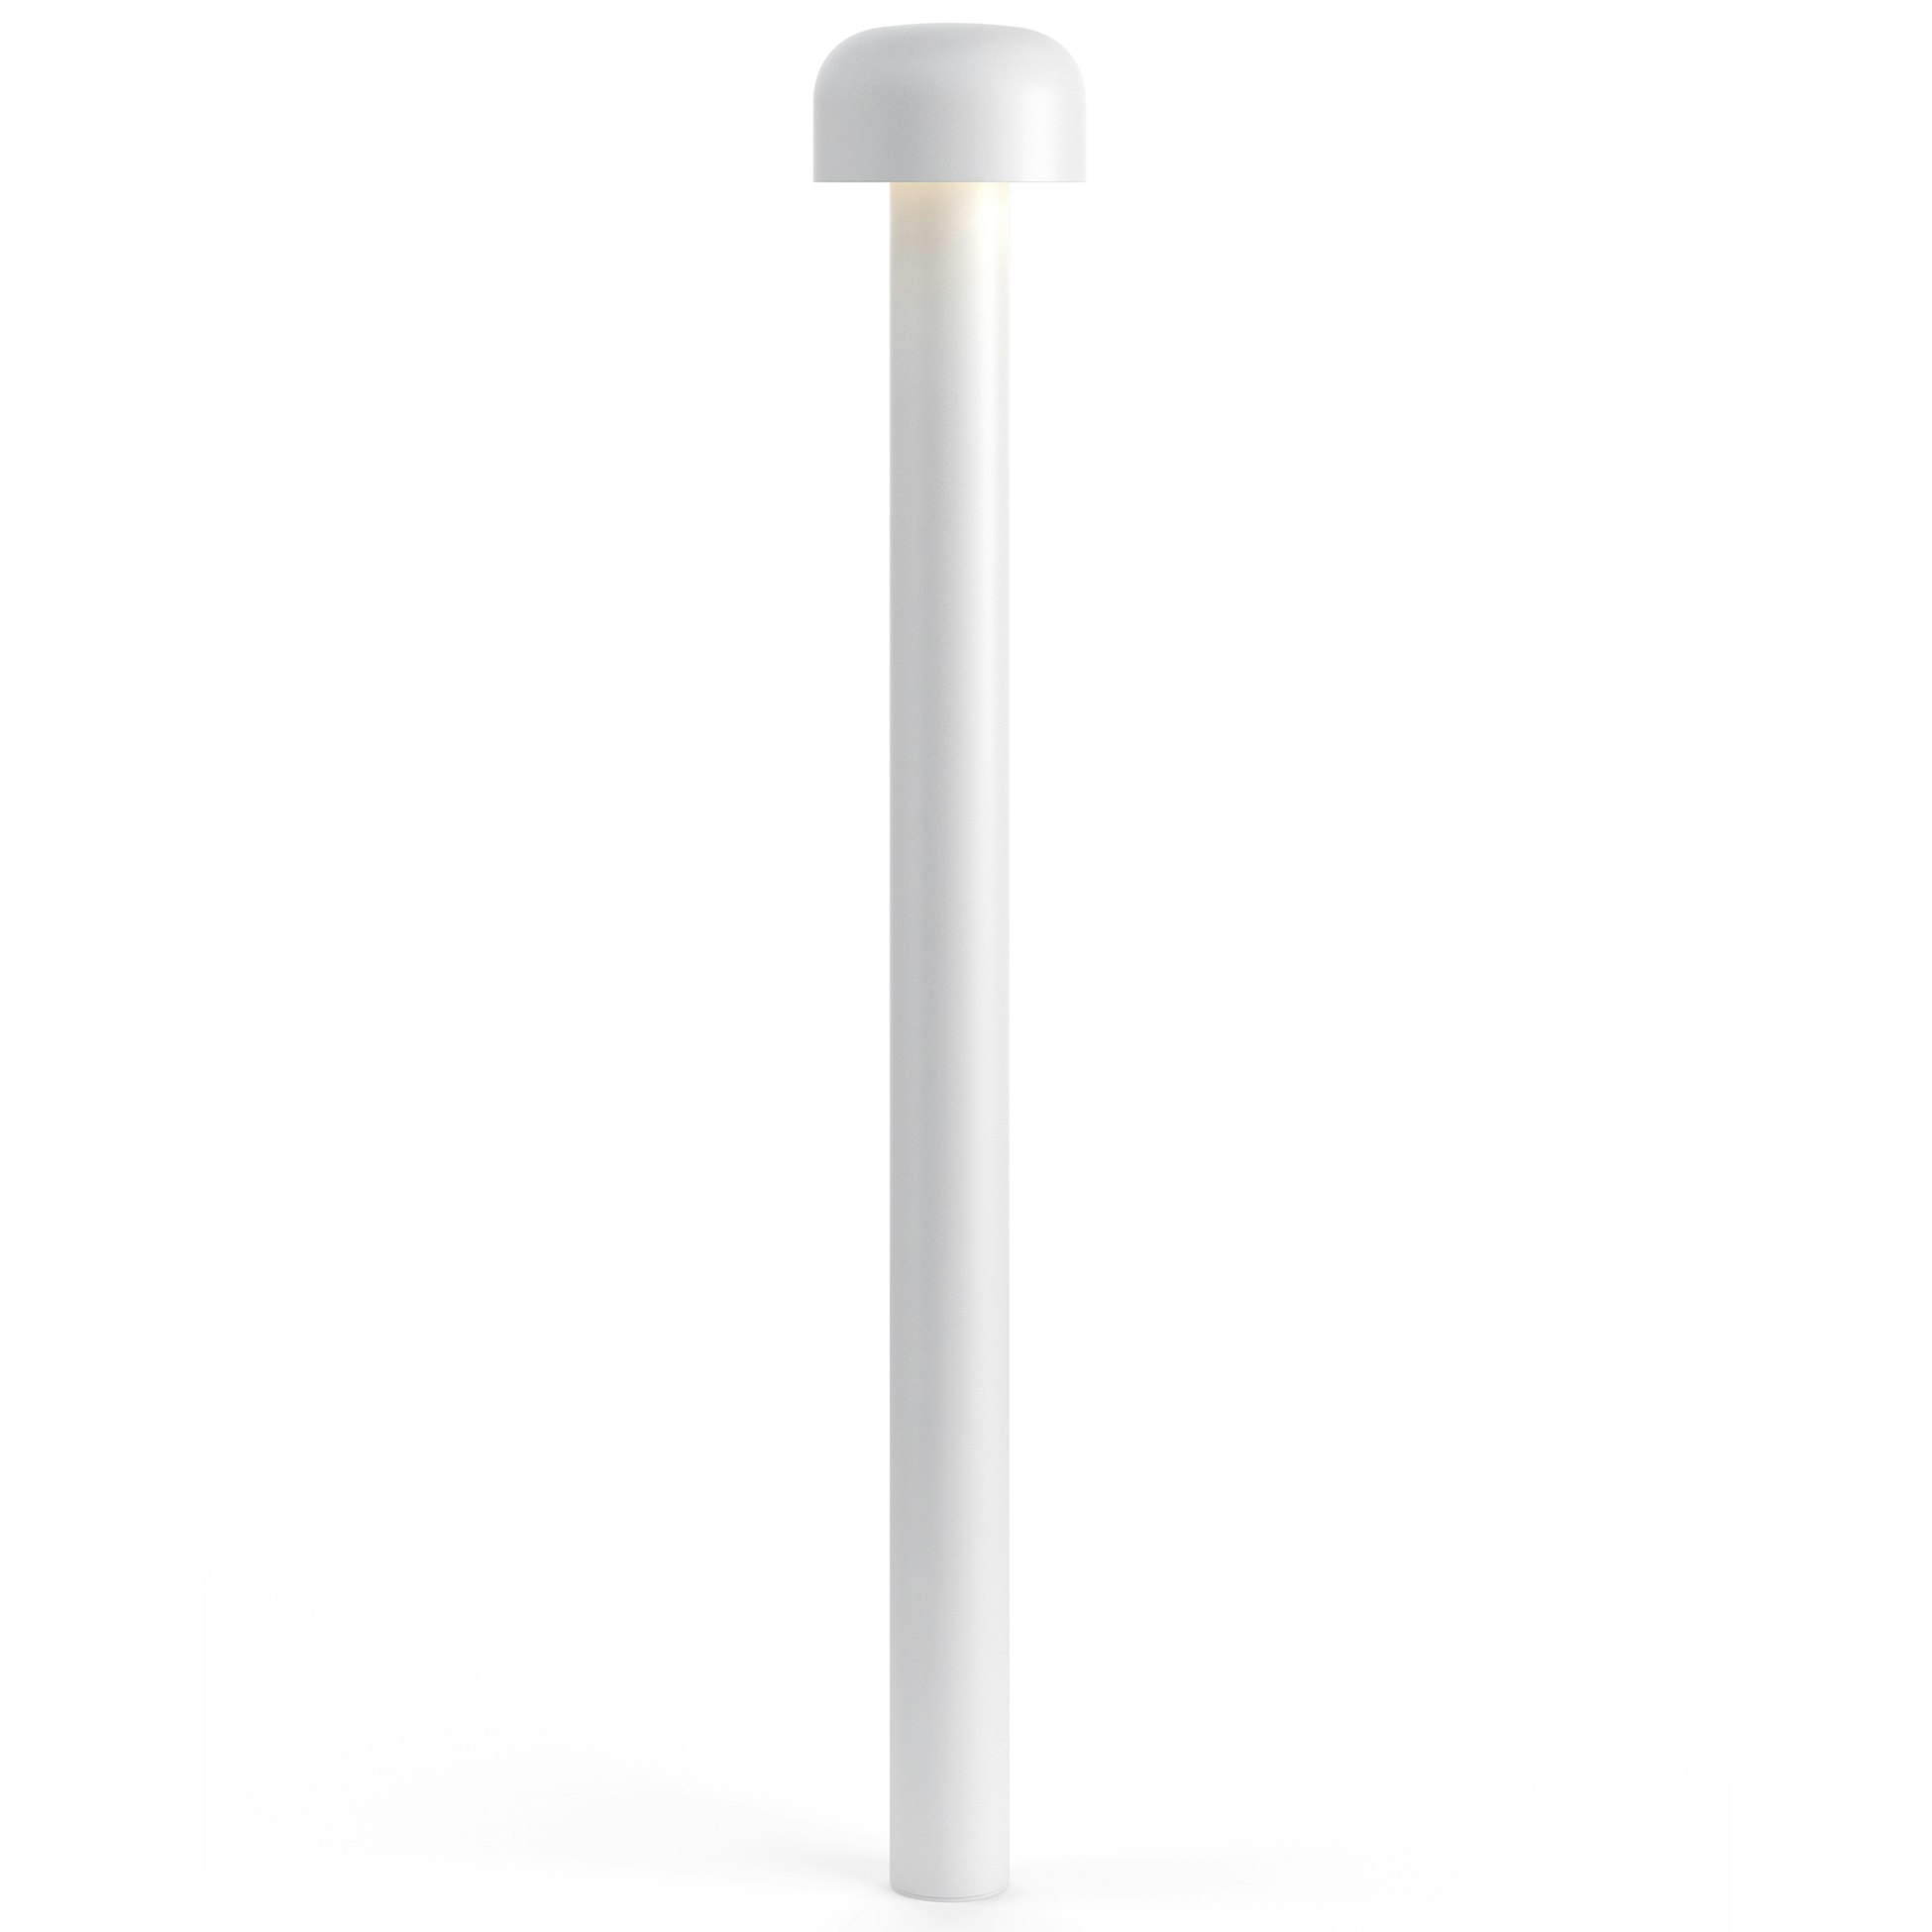 Browse all Bellhop Bollard products | Flos